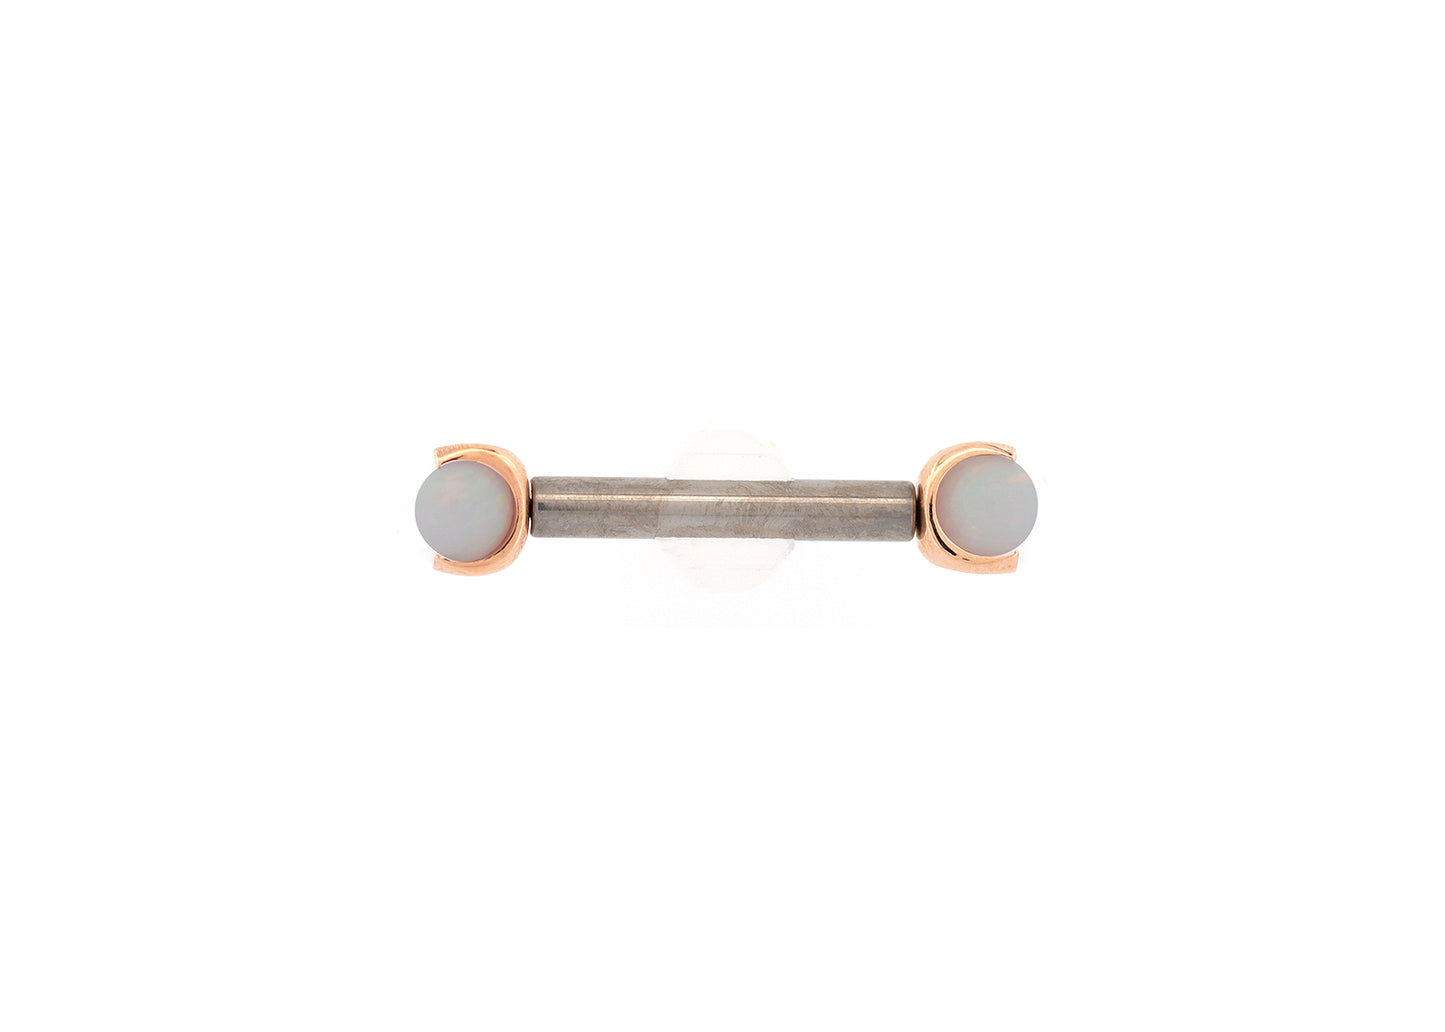 18K Gold Claw Prong White Opal Nipple Barbell